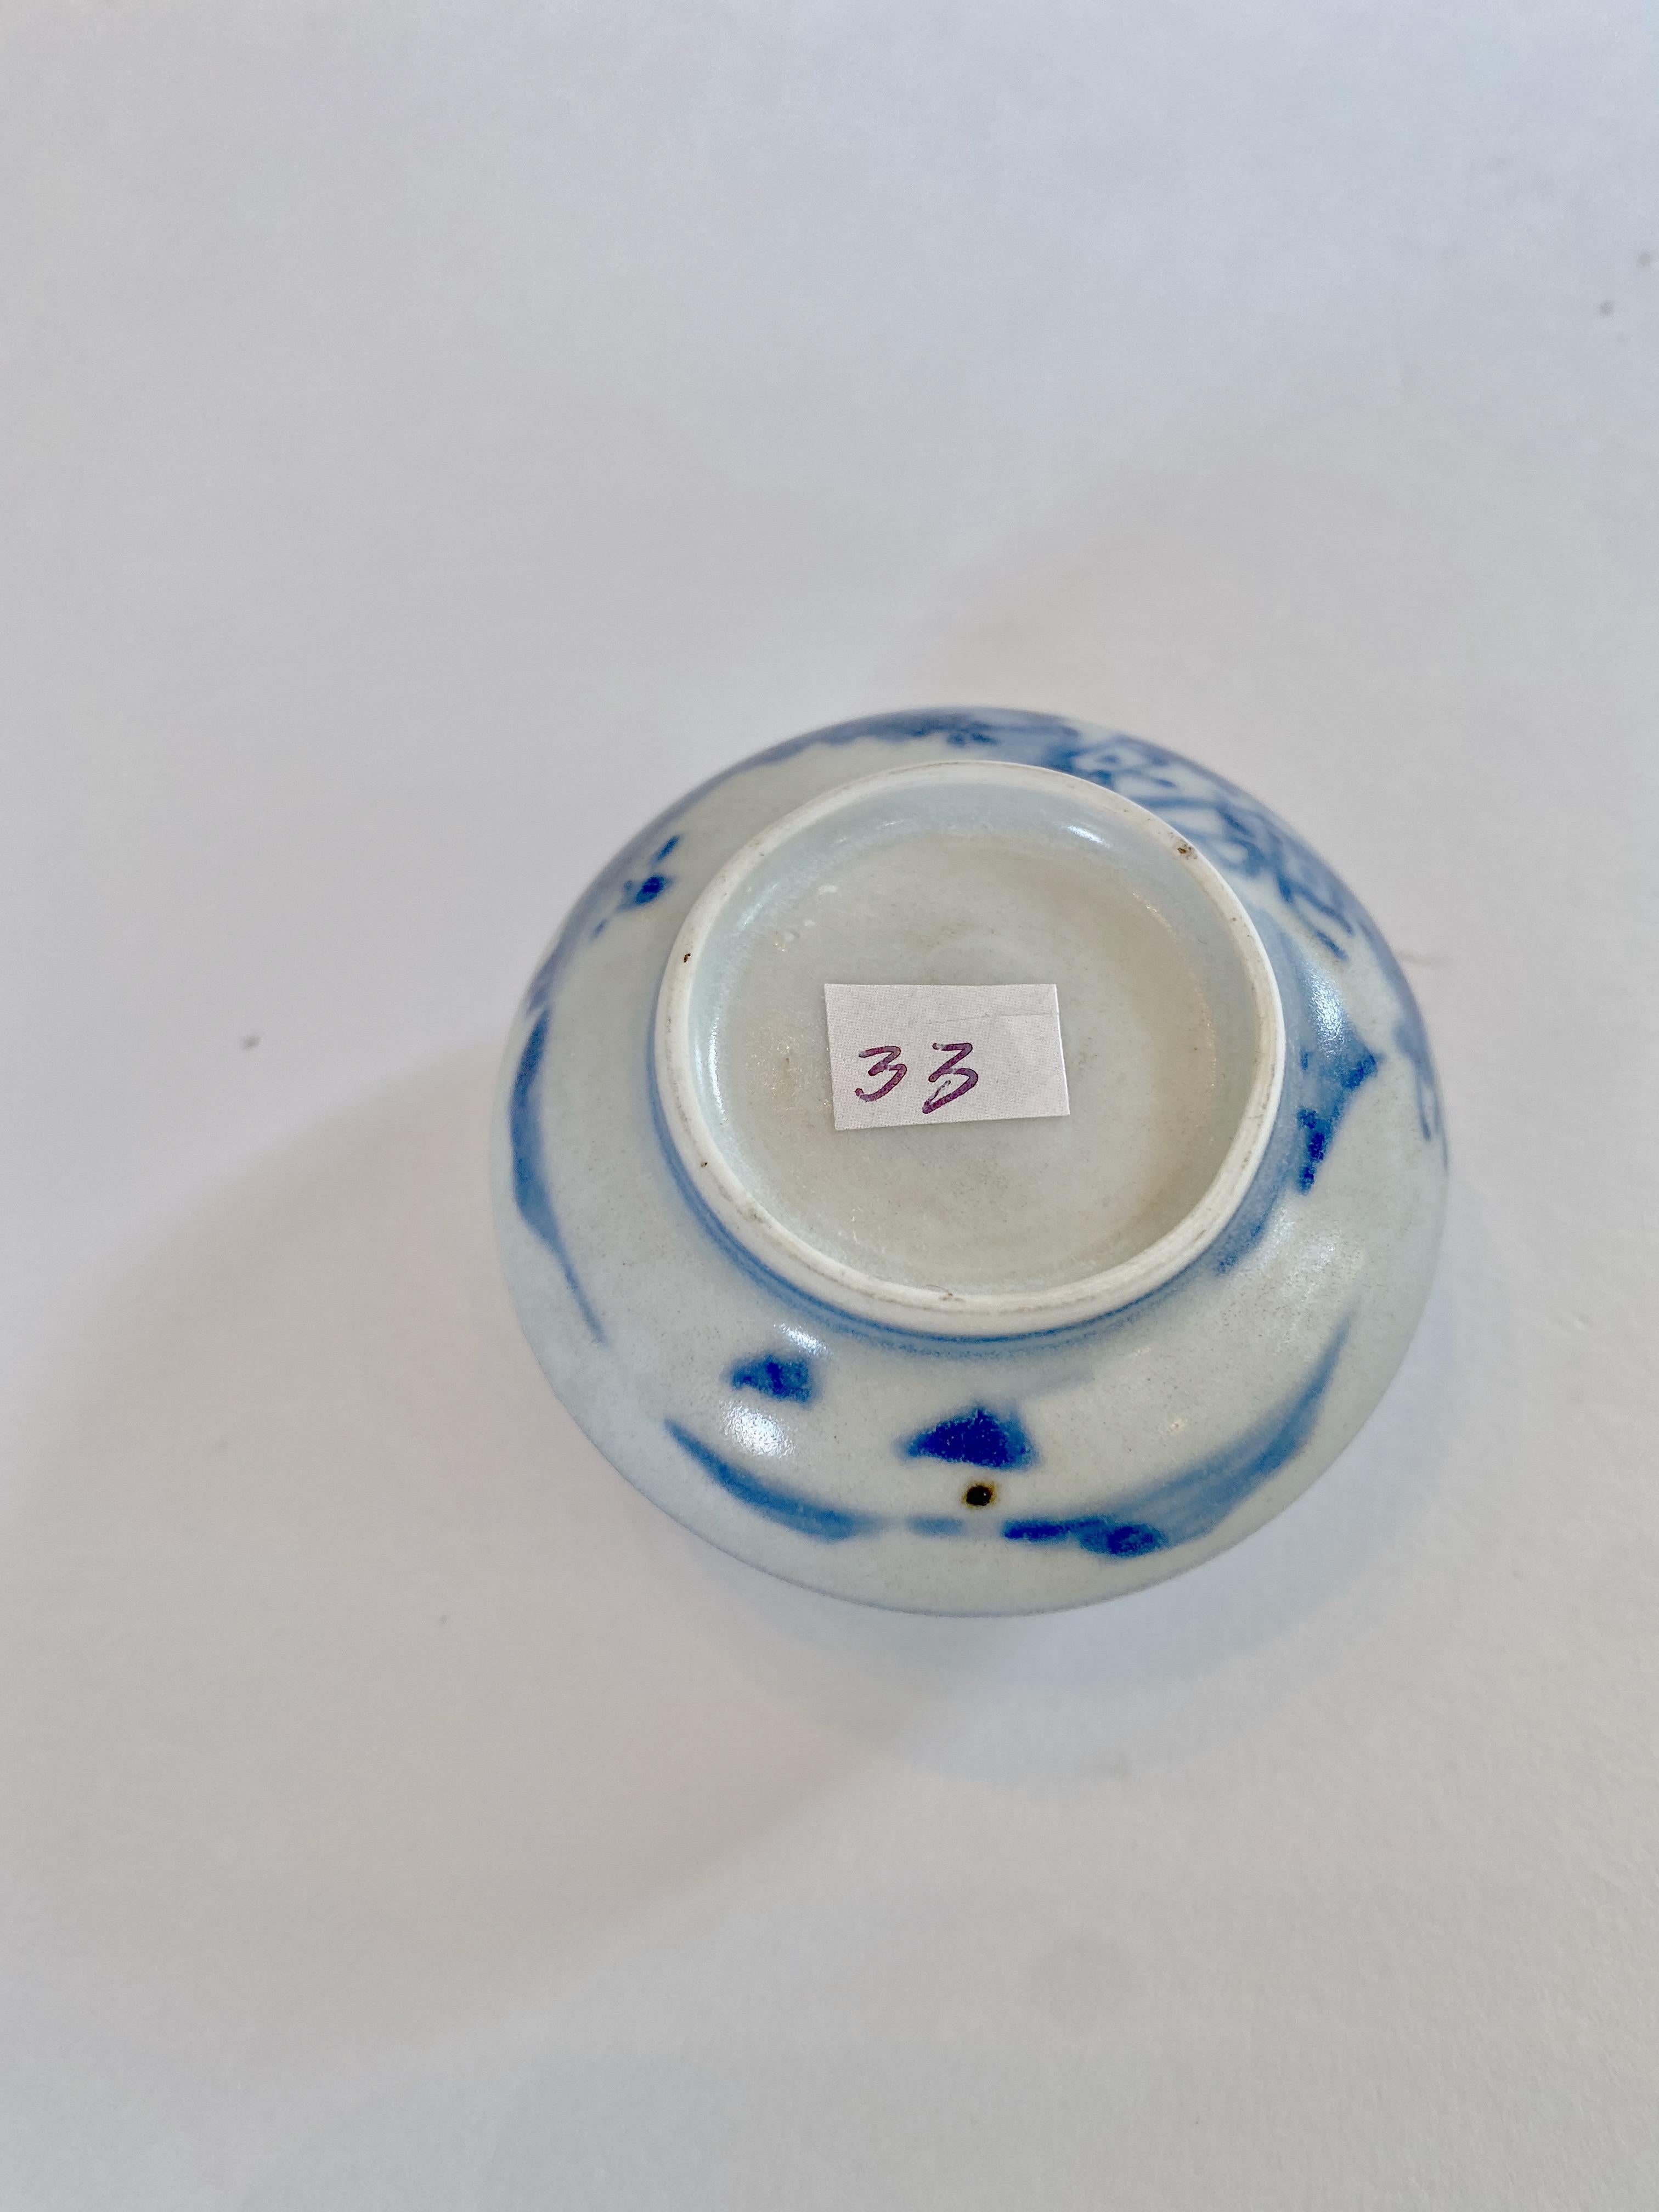 Blue and White Porcelain Box from the Hatcher Collection (Item C) 2